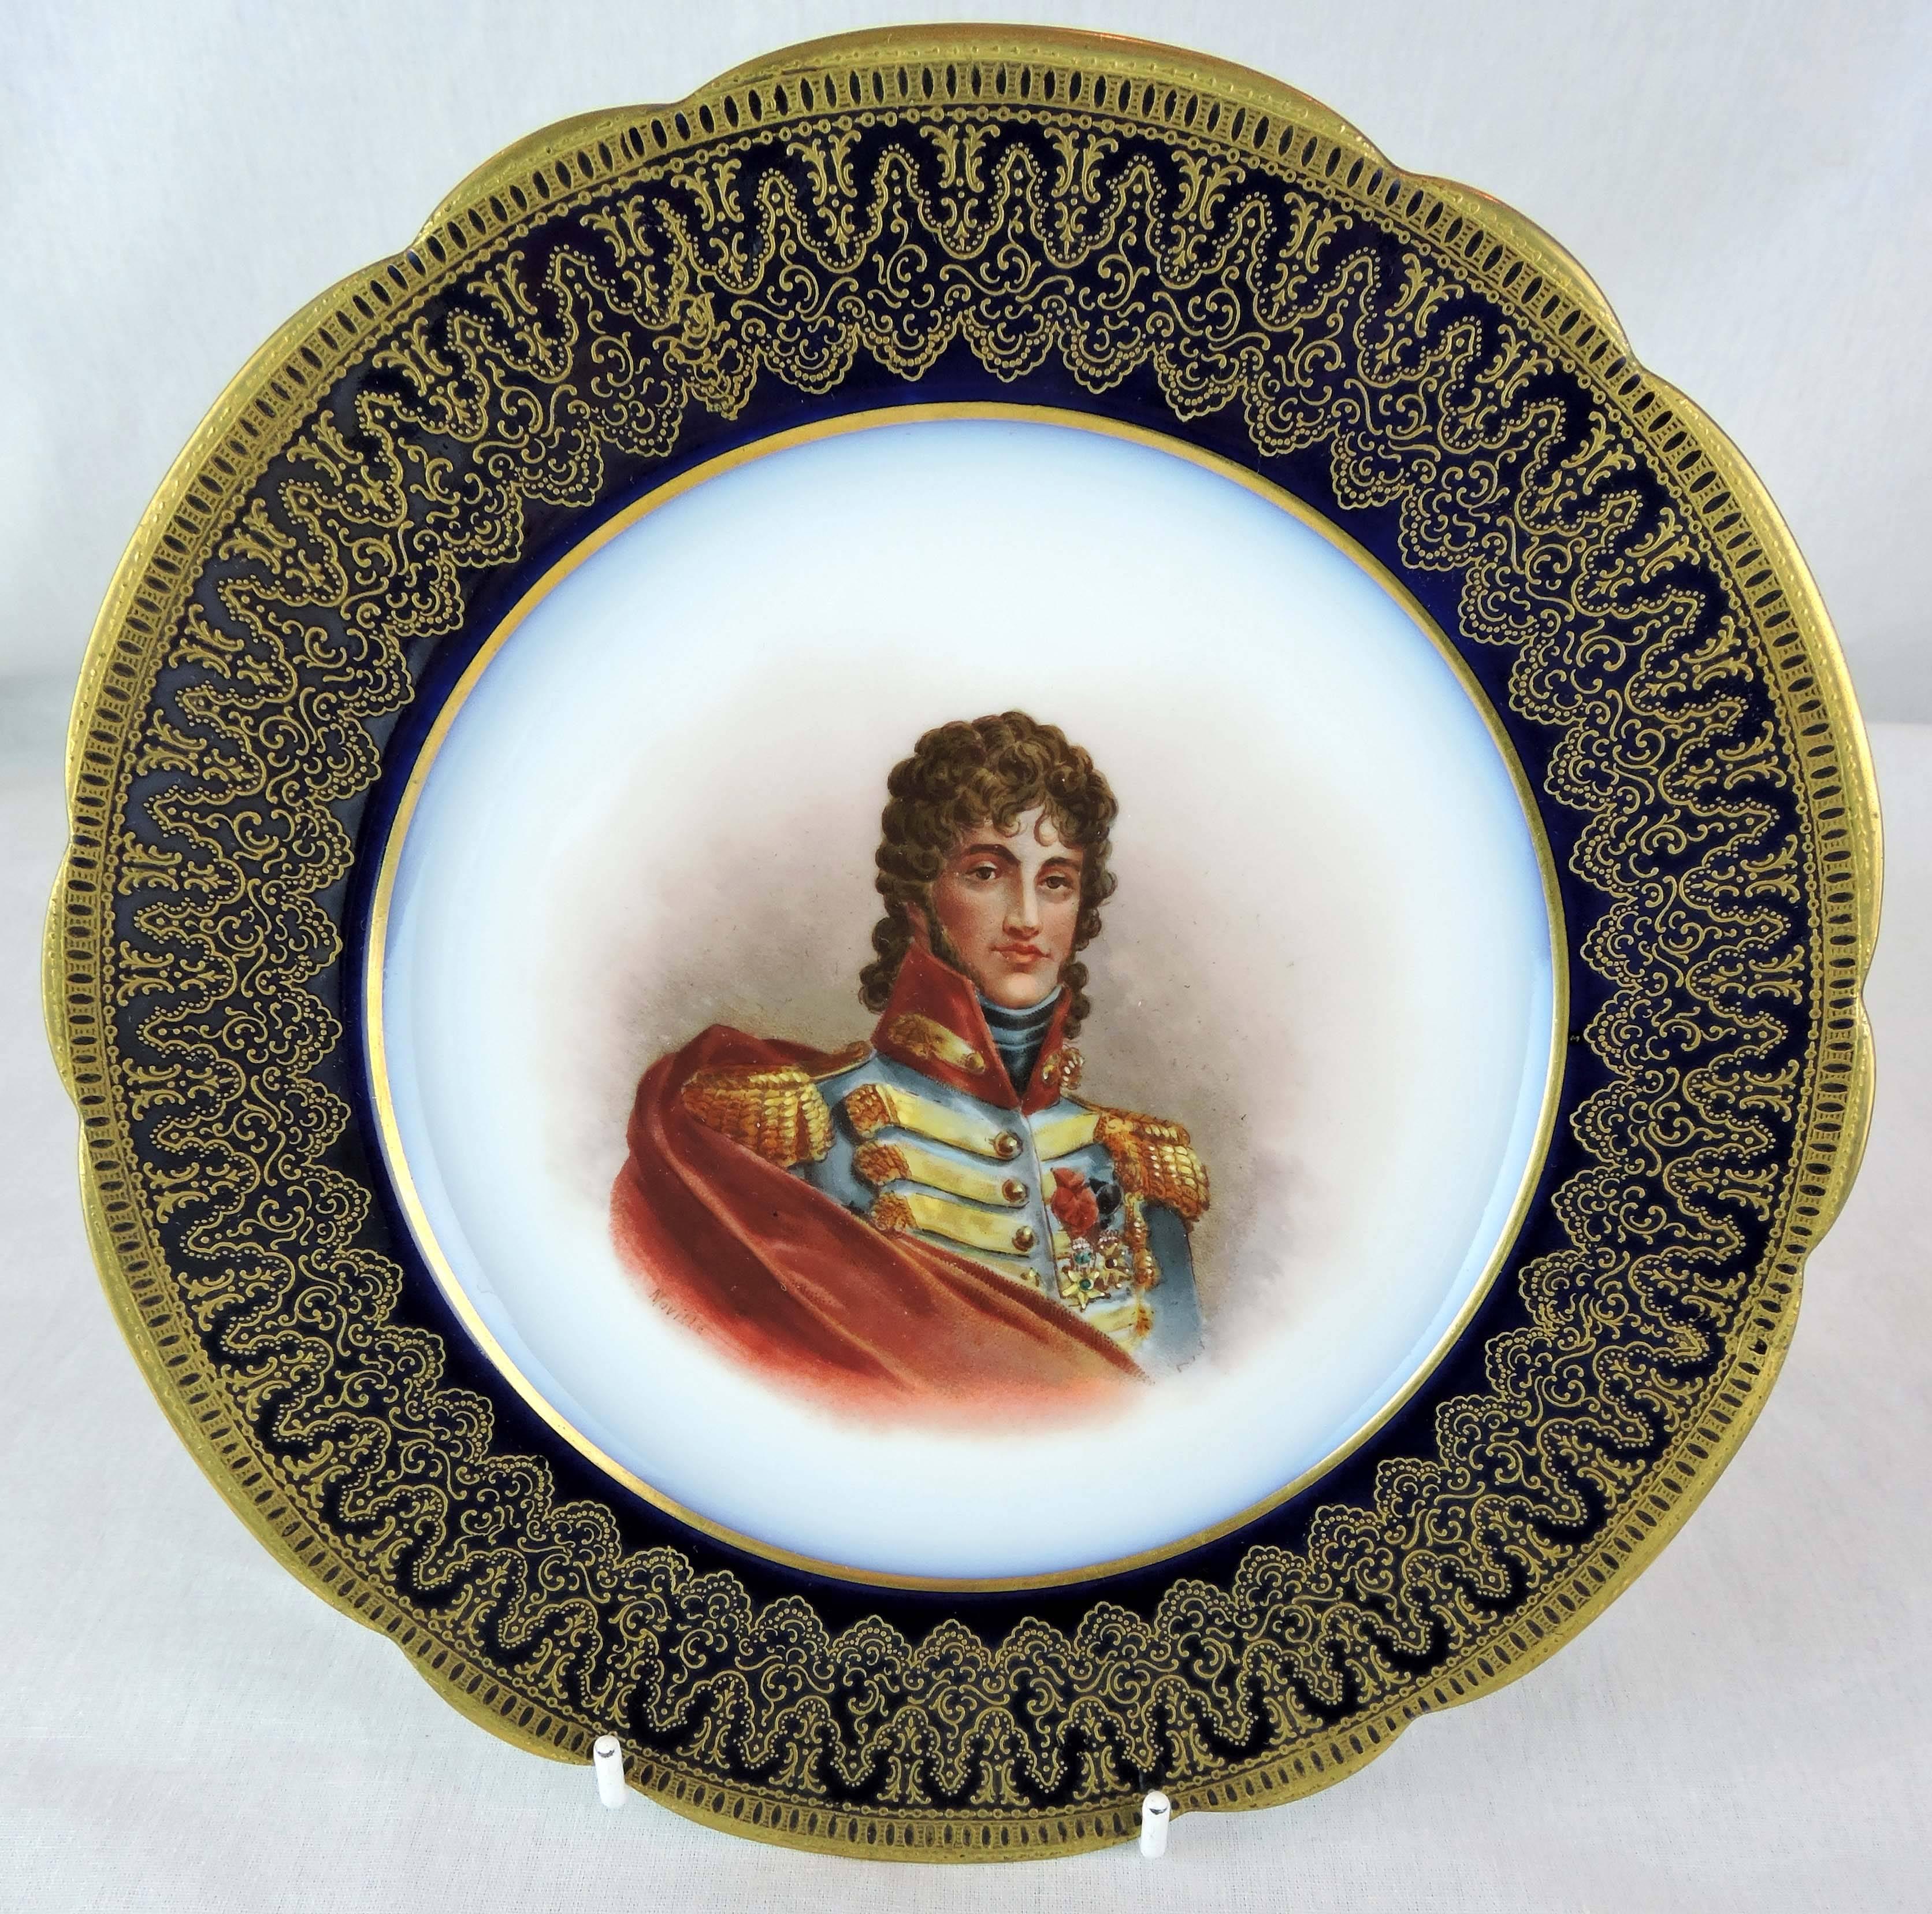 This pair of Sèvres porcelain portrait plates has scalloped, cobalt blue rims, overlaid with raised dentelle gilt and gilt trim along the outer edges.

The centres of the plates feature hand-painted, signed portraits: one of Madame Pompadour, the